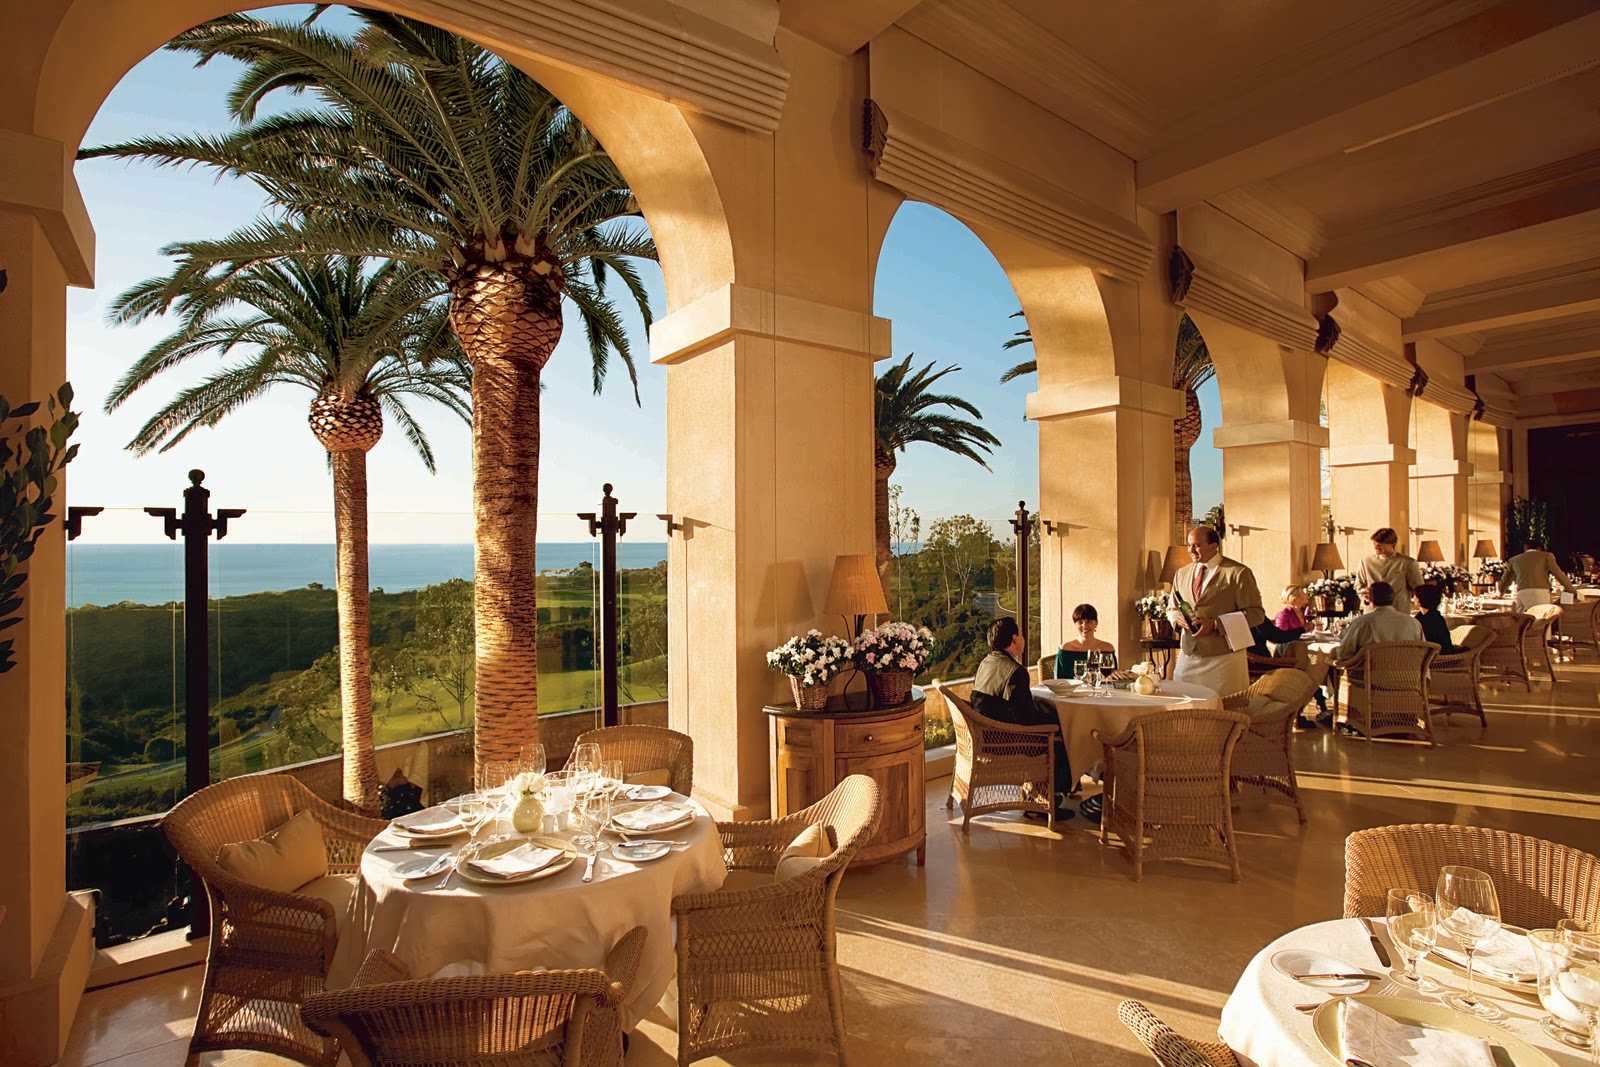 Resort at Pelican Hill - Southwest & Southern California for Families